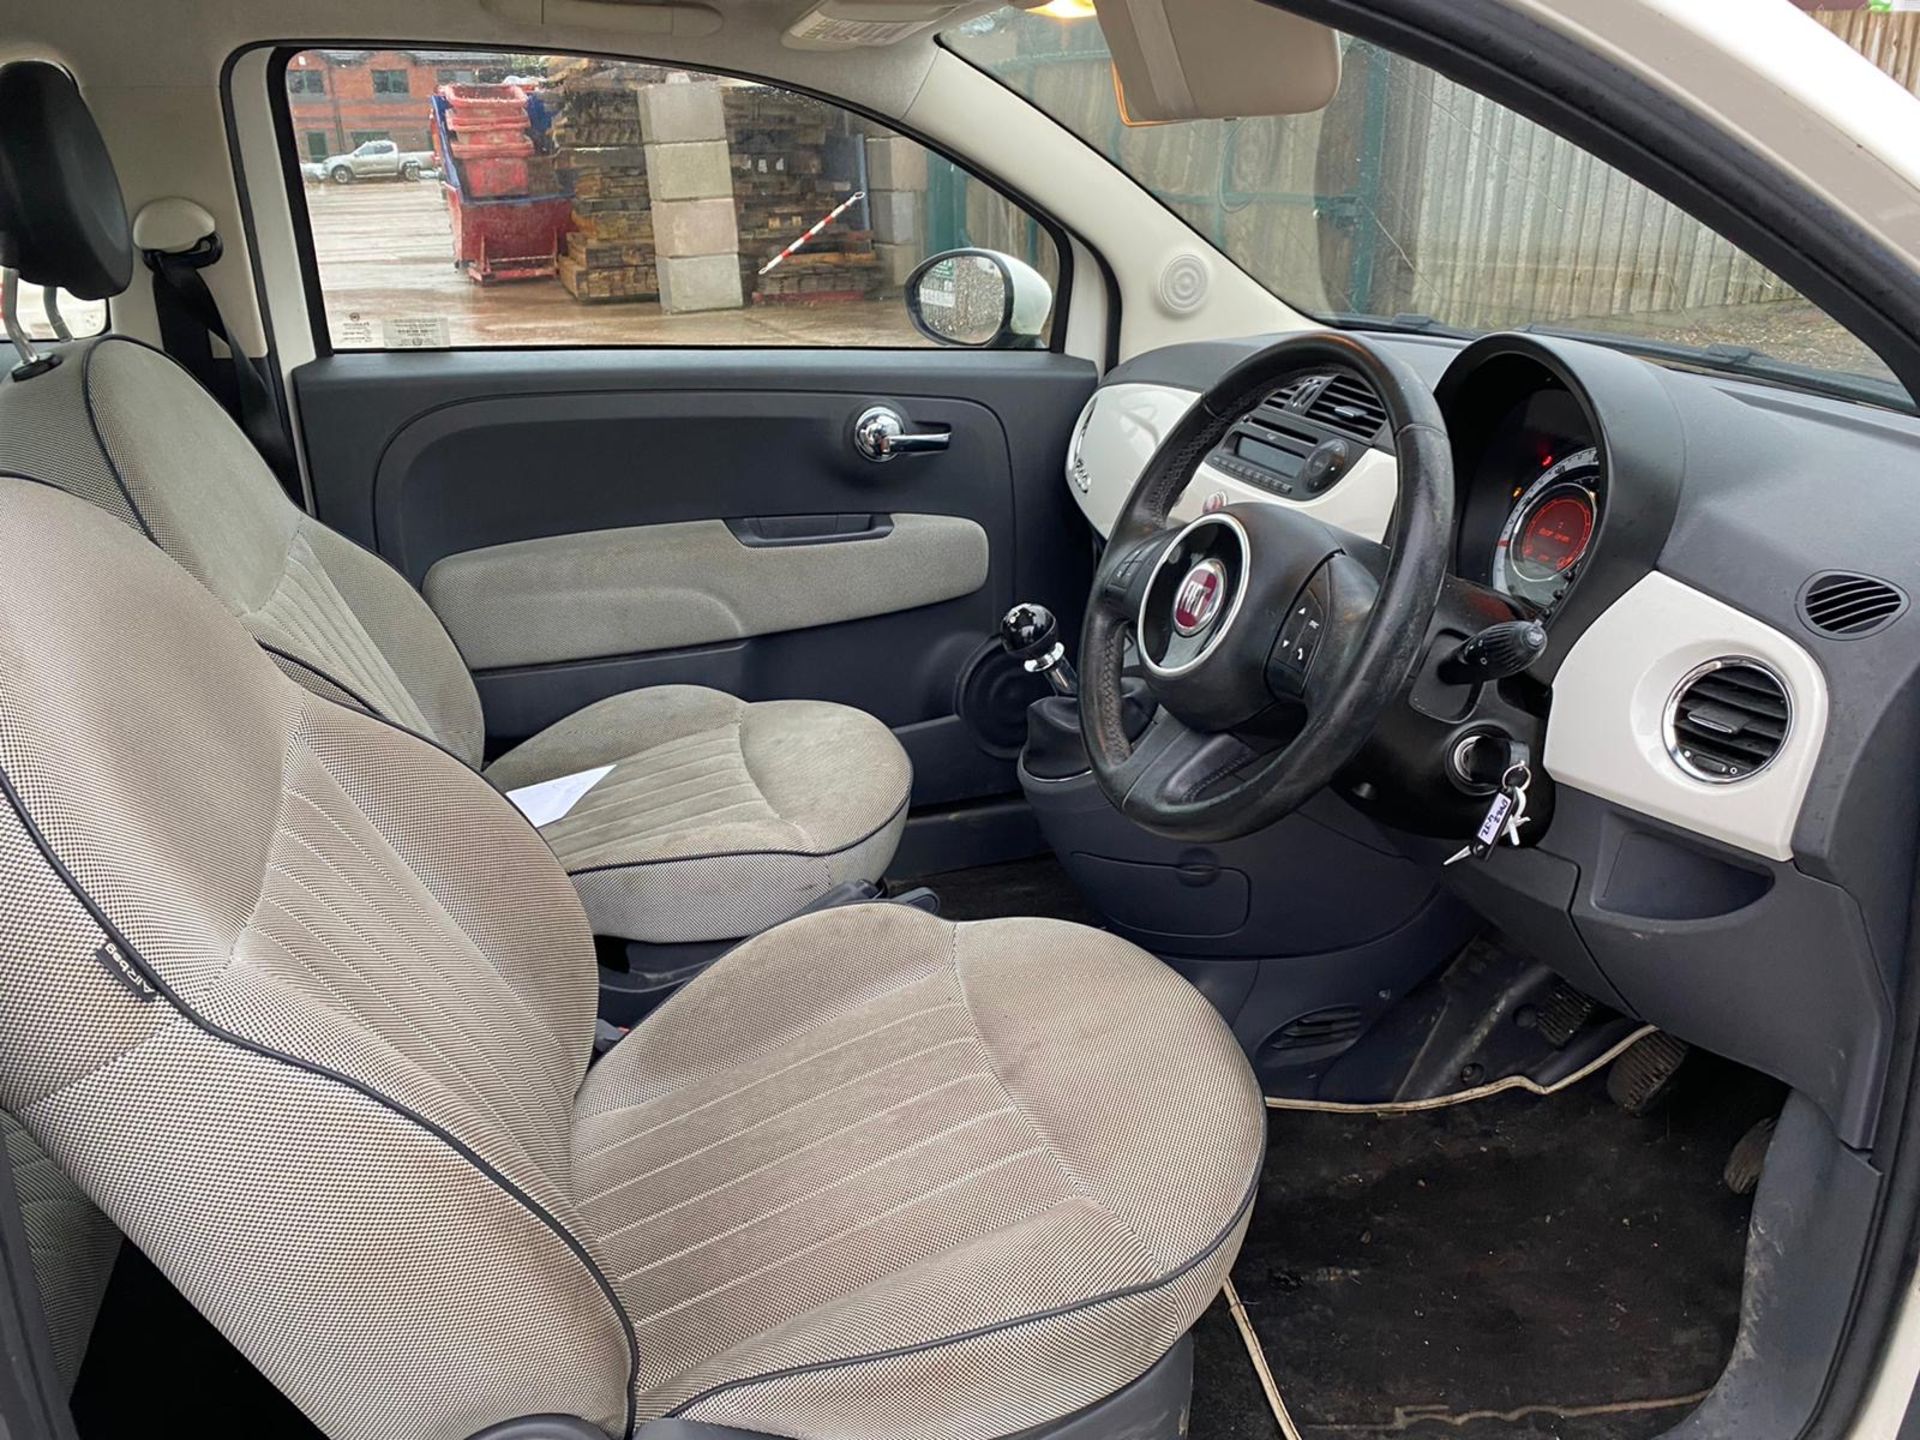 (ON SALE) FIAT 500 1.2 "LOUNGE" (START/STOP) 2013 MODEL - LOW MILES - AIR CON -LOW MILES- NO VAT - Image 10 of 13